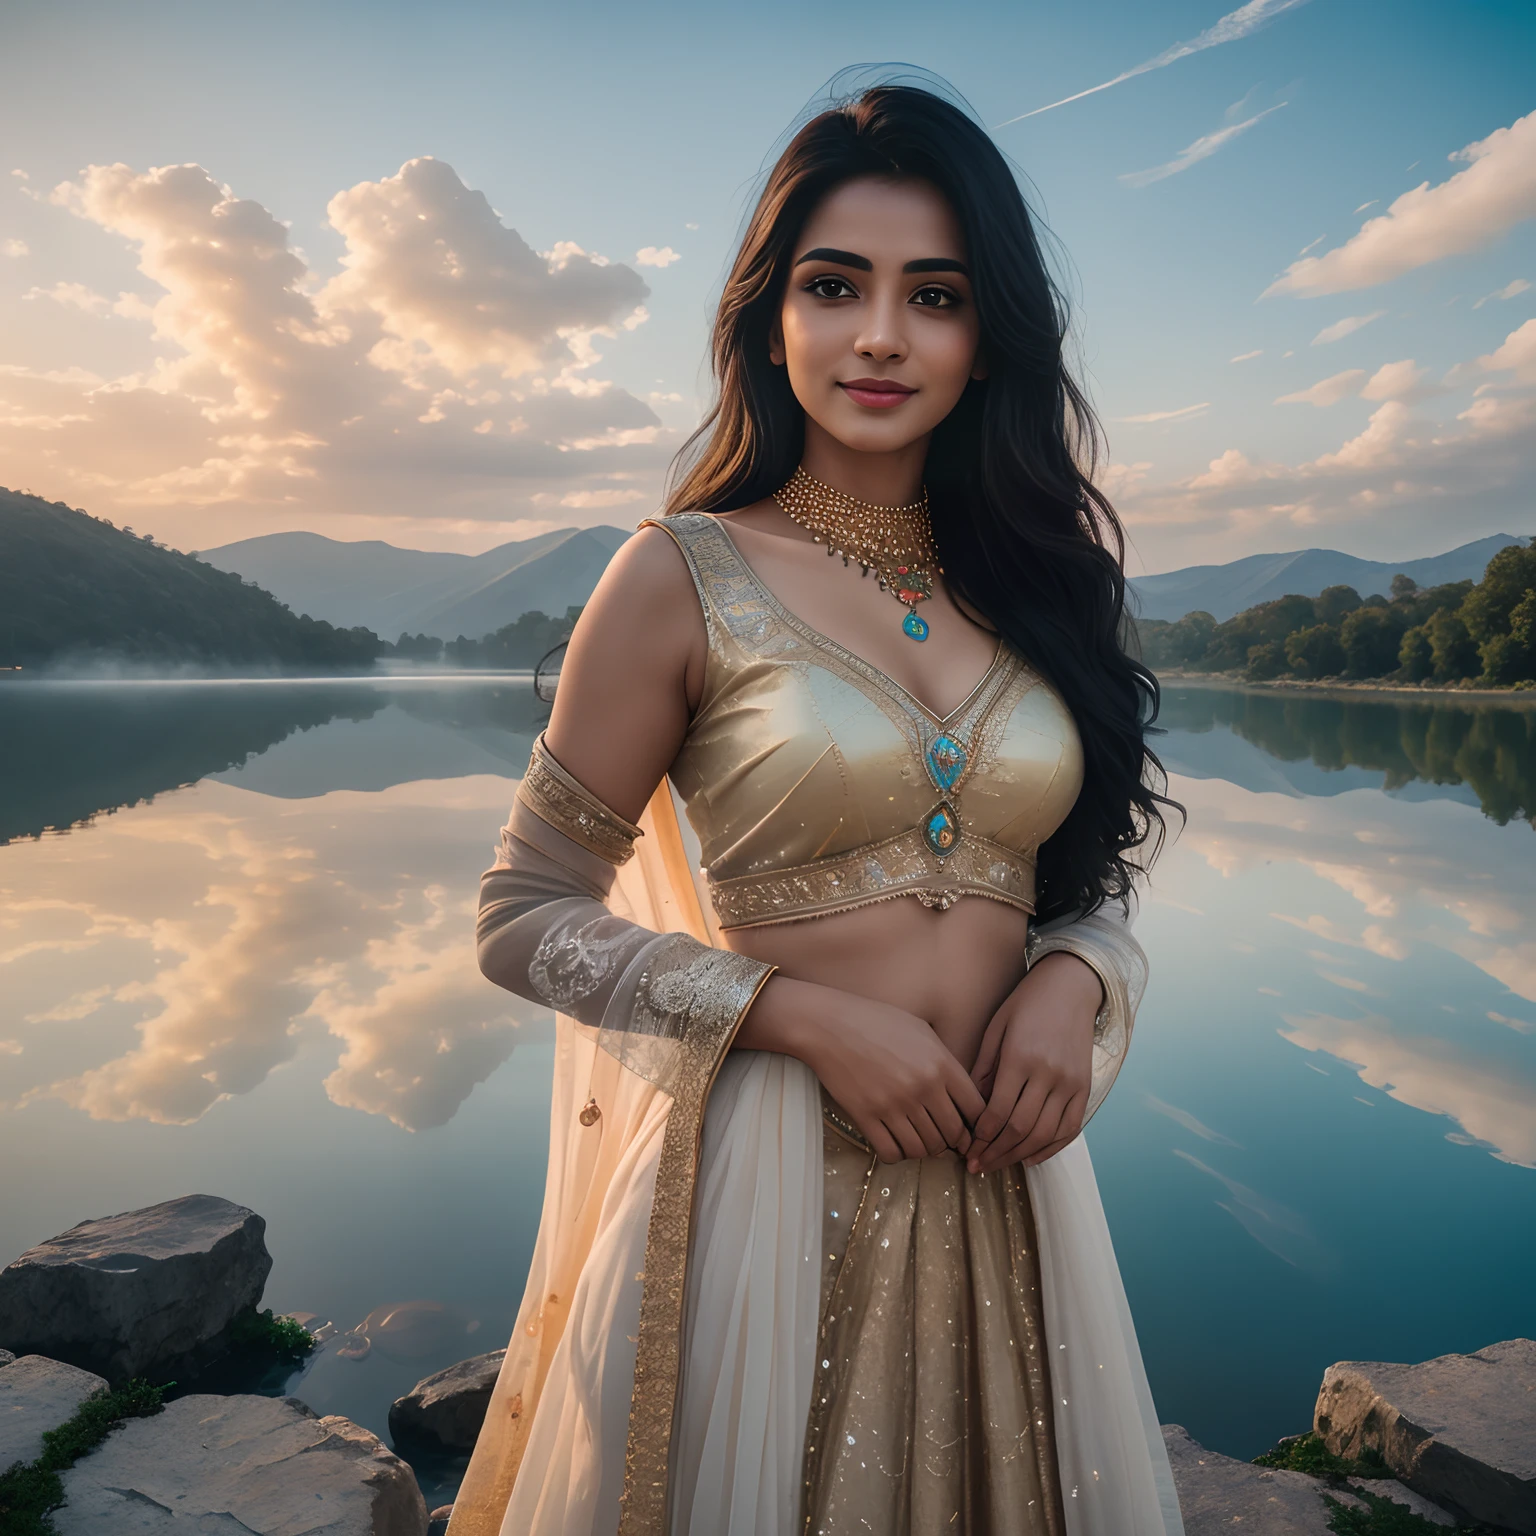 indian mature girl indain women, mature indian ,Masterpiece, (((full figure ))) entire body in frame, (((magical lighting action shot))) (((beautiful fit cute smiling woman standing on marble surrounded by clouds in heaven vast floating lakes rivers waterfalls fantasy landscape))), (((gold lace looking into the camera))) , ((( accurate hands accurate eyes))) moody lighting, blue hour, blue colors, very detailed, dramatic light, 8k HD high definition detailed realistic, detailed, skin texture, hyper detailed, realistic skin texture, armature, best quality, ultra high res, (photorealistic:1.4), high resolution, detailed, raw photo, sharp re, nikon d850 film stock photograph 4 kodak portra 400 camera f1.6 lens rich colors hyper realistic lifelike texture dramatic lighting unrealengine ,cinestill 800, (((accurate female anatomy, perfect eyes))) (((500px, fstoppers, photosight.ru, iso noise)))